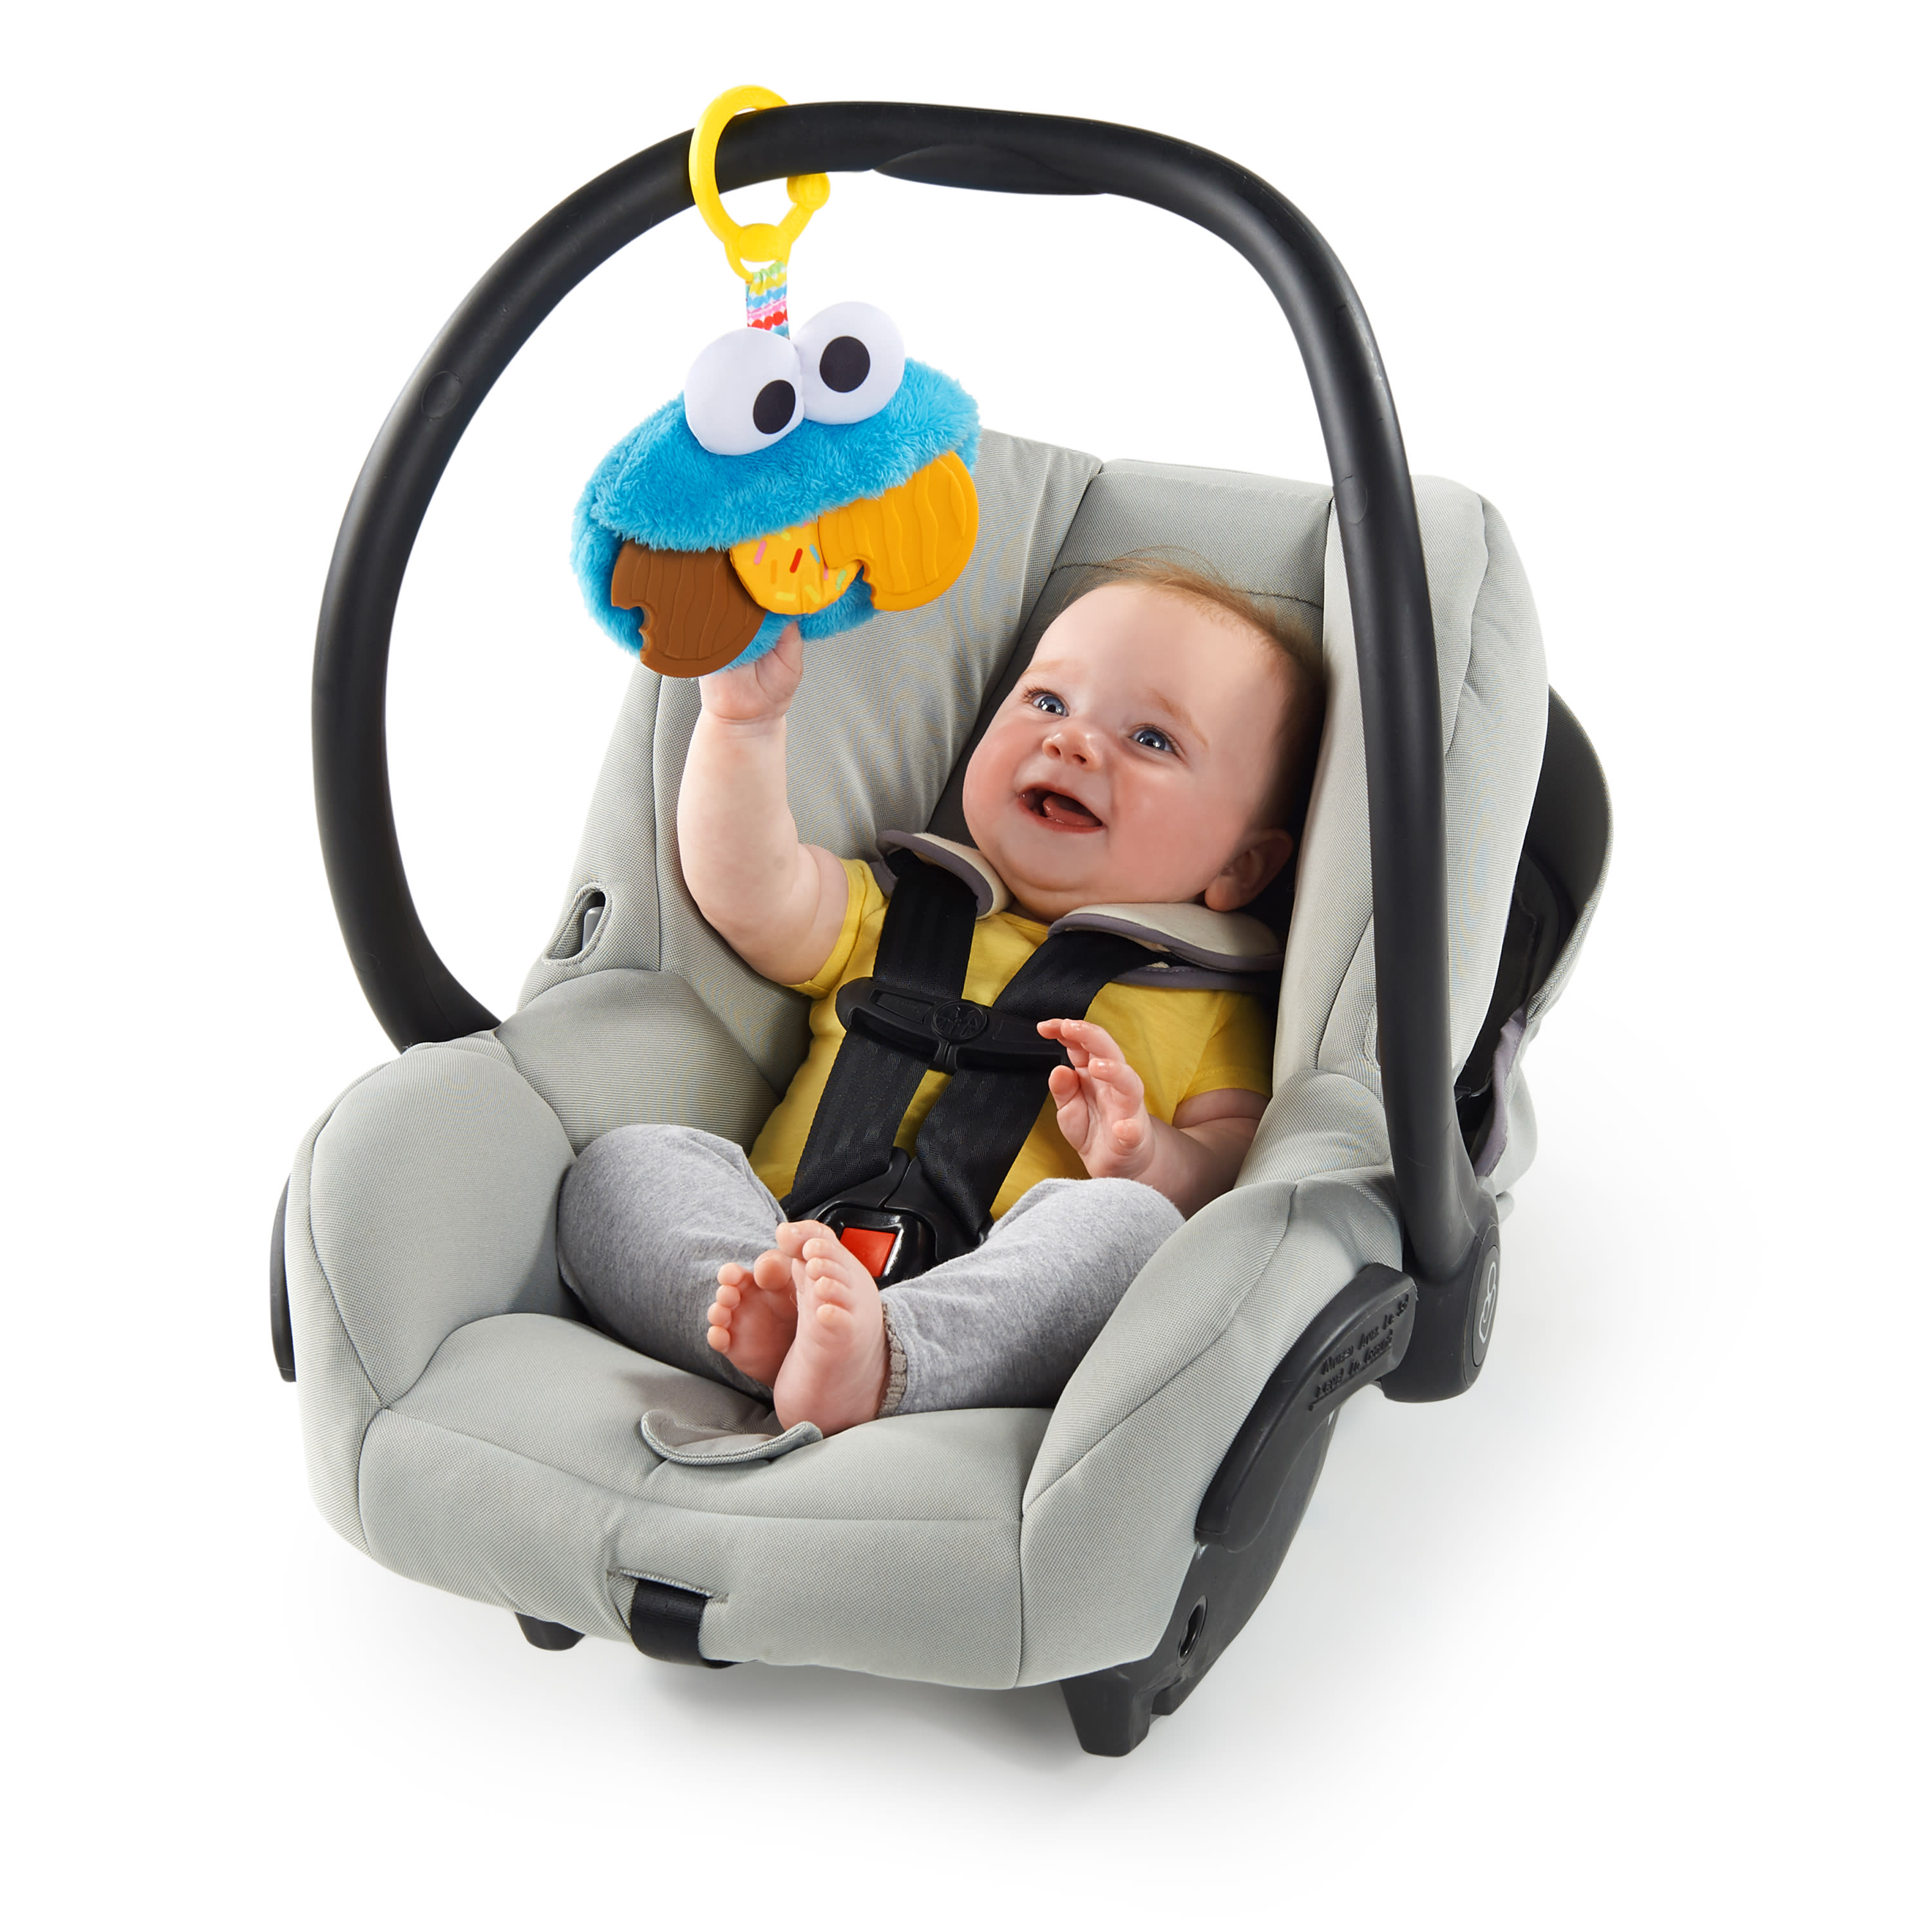 Bright Starts Sesame Street Cookie Monster Mania Teether, Stroller or Carrier Toy, Age 3-12 Months - image 5 of 10